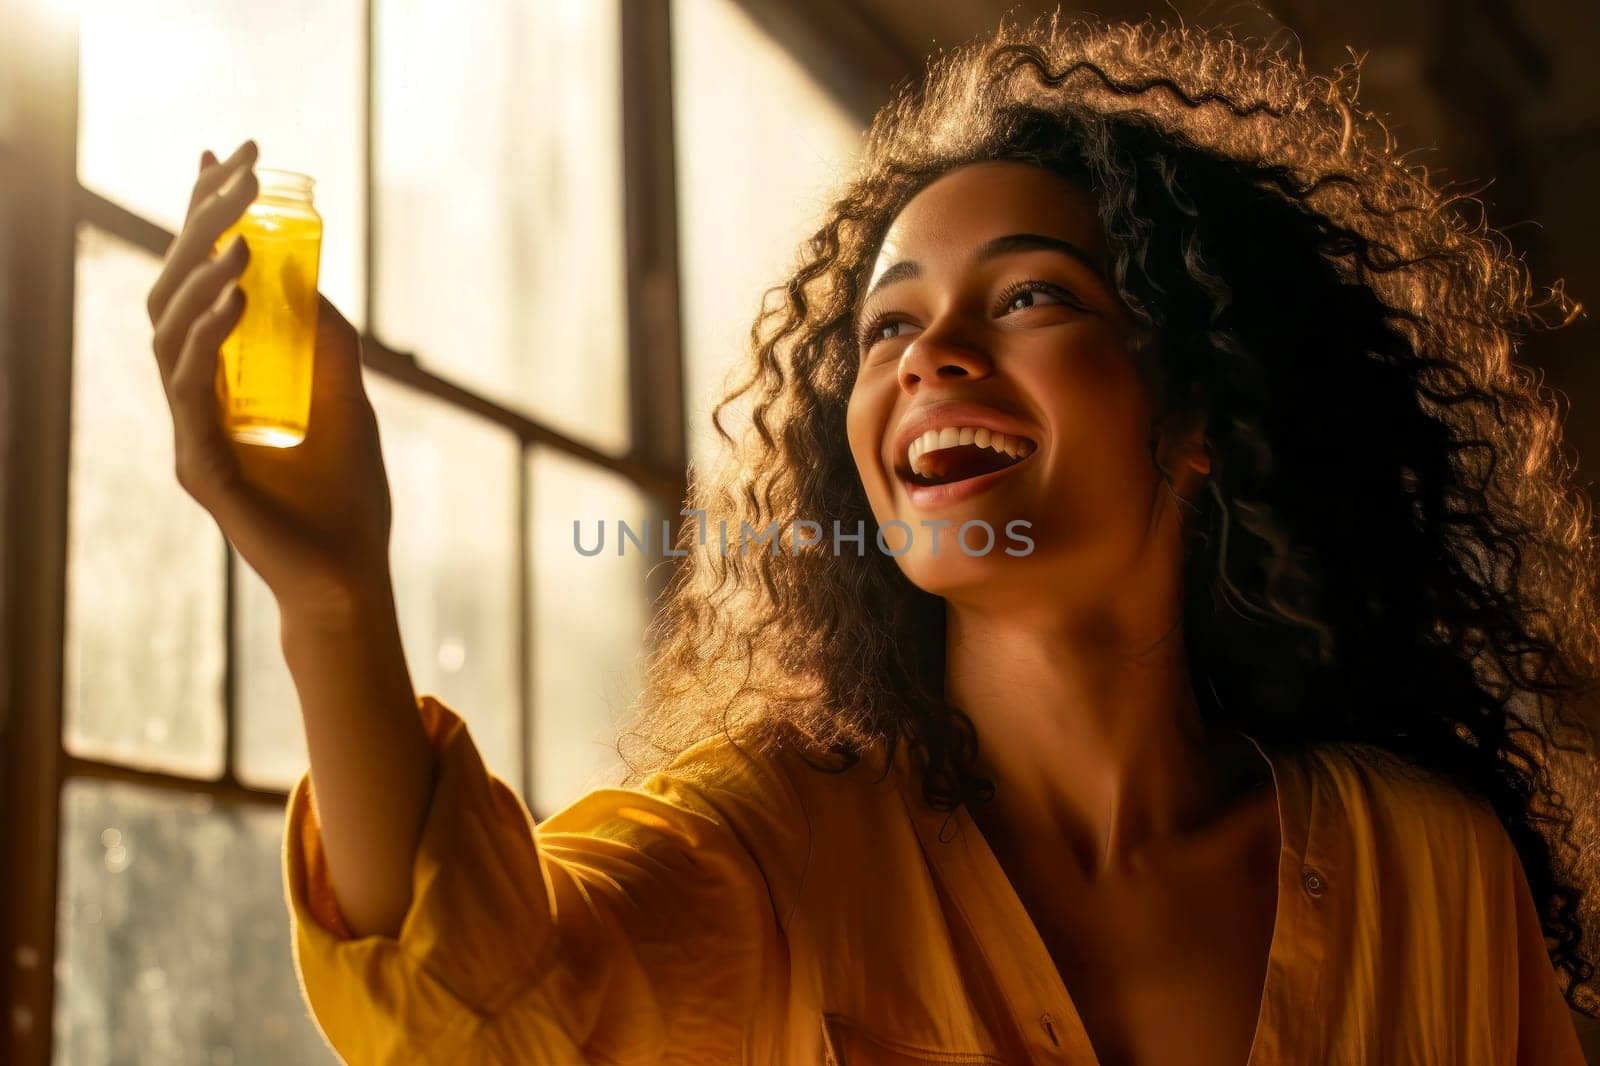 A photo portraying a smiling girl with a substance, symbolizing the concept of drugs.